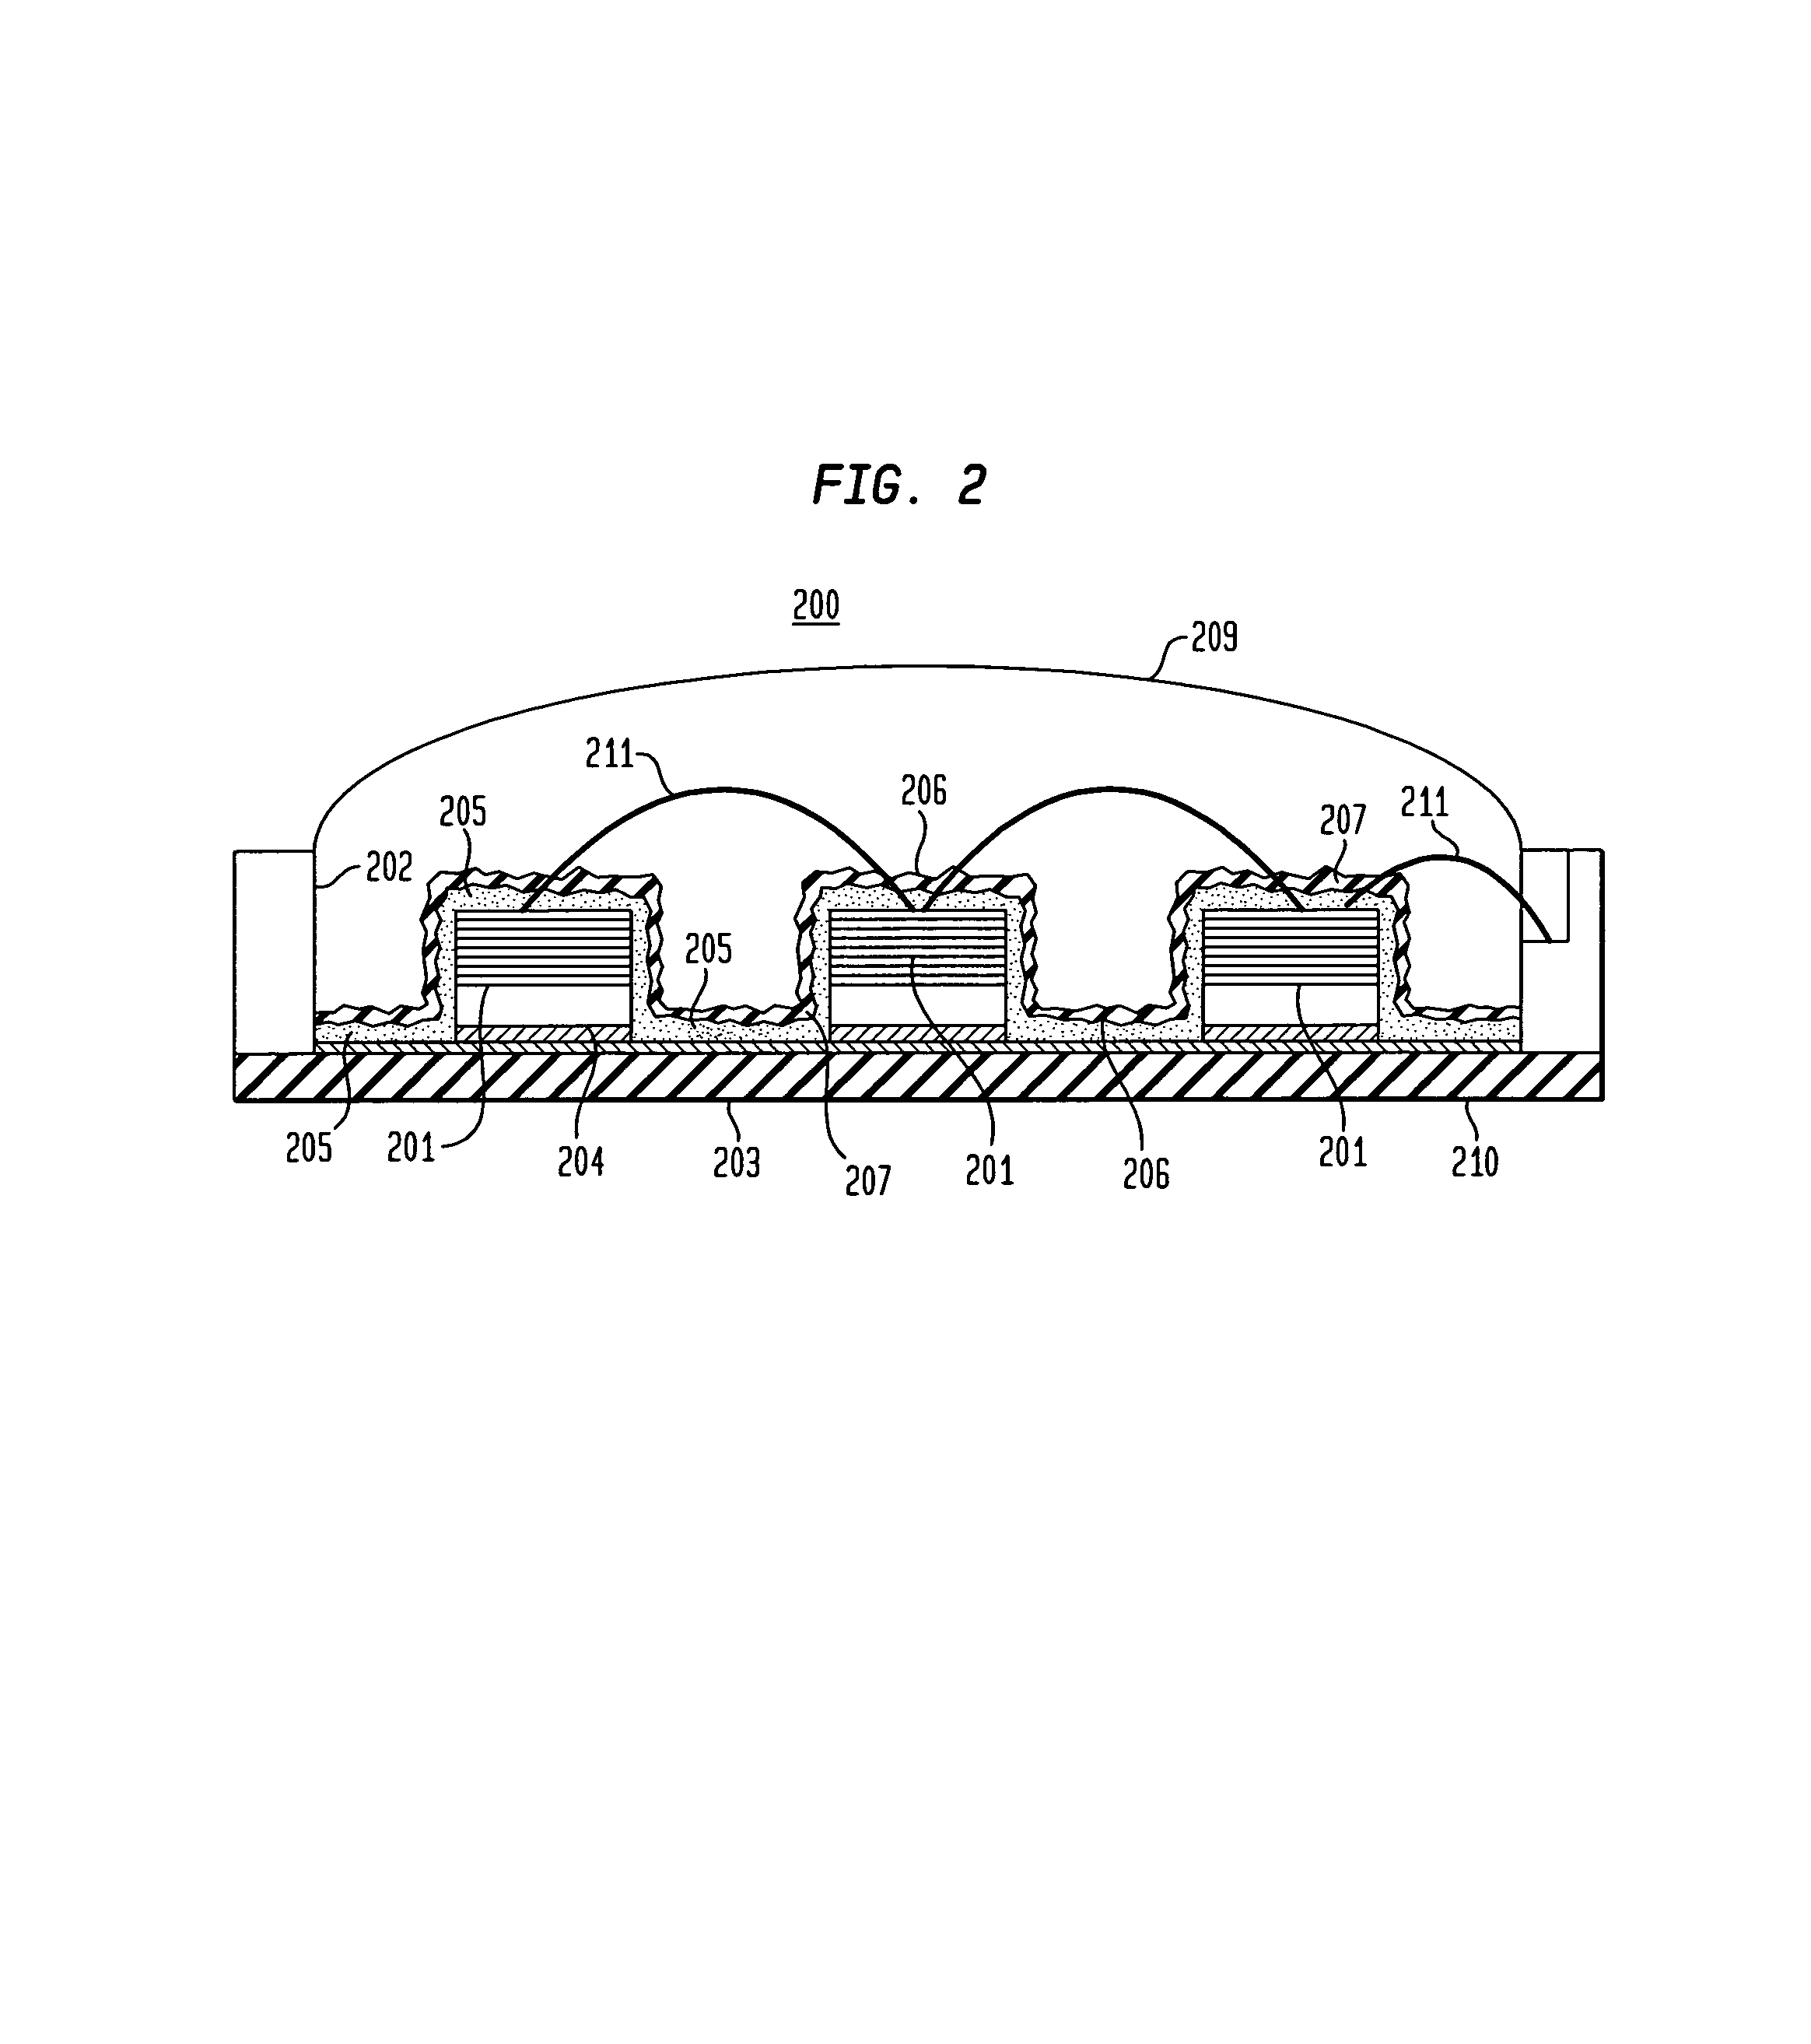 Illumination devices comprising white light emitting diodes and diode arrays and method and apparatus for making them